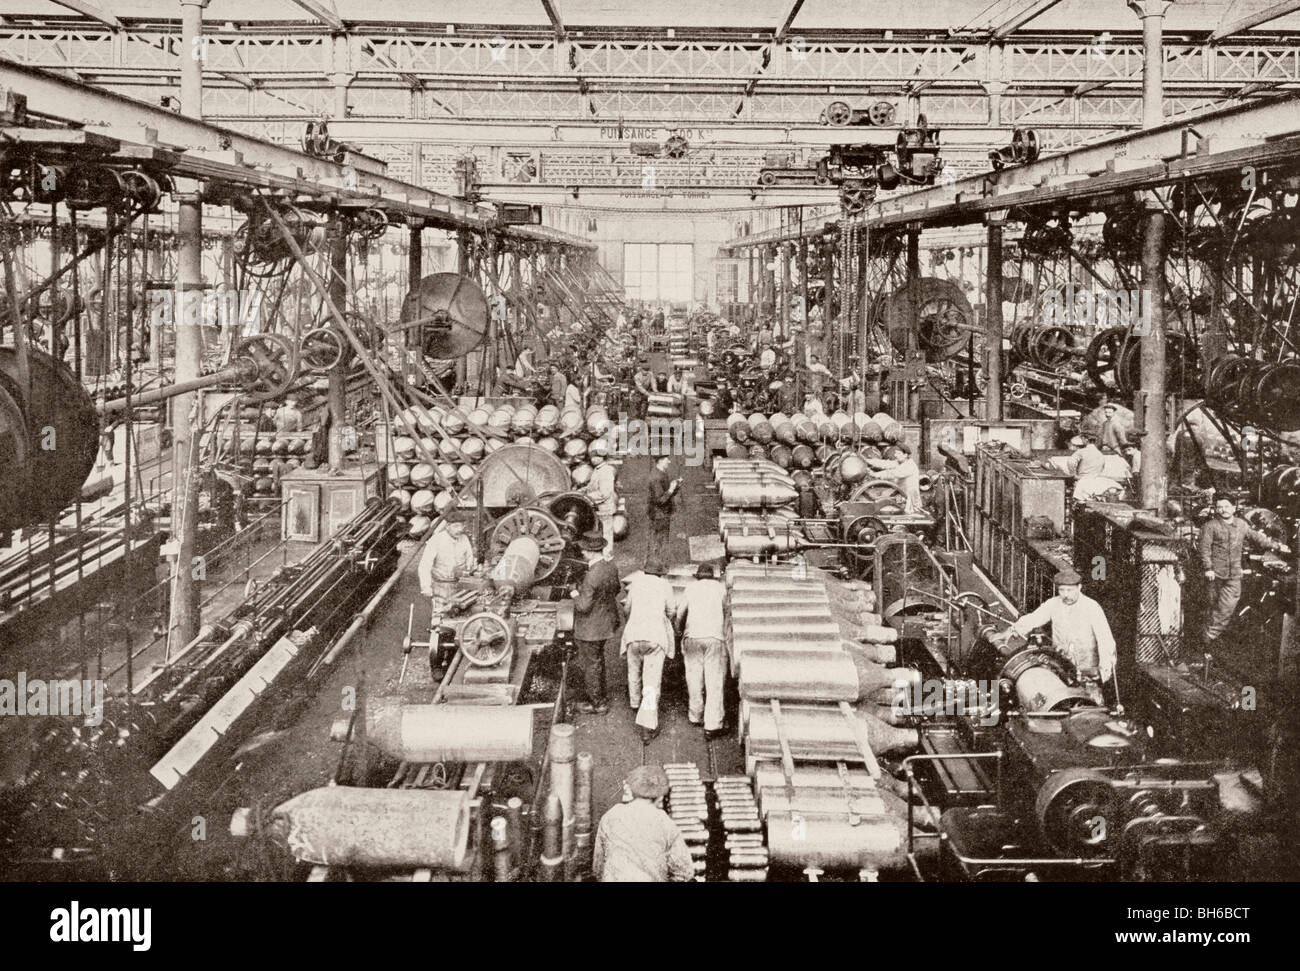 Munitions factory in Le Creusot region of France producing large calibre shells during First World War. Stock Photo